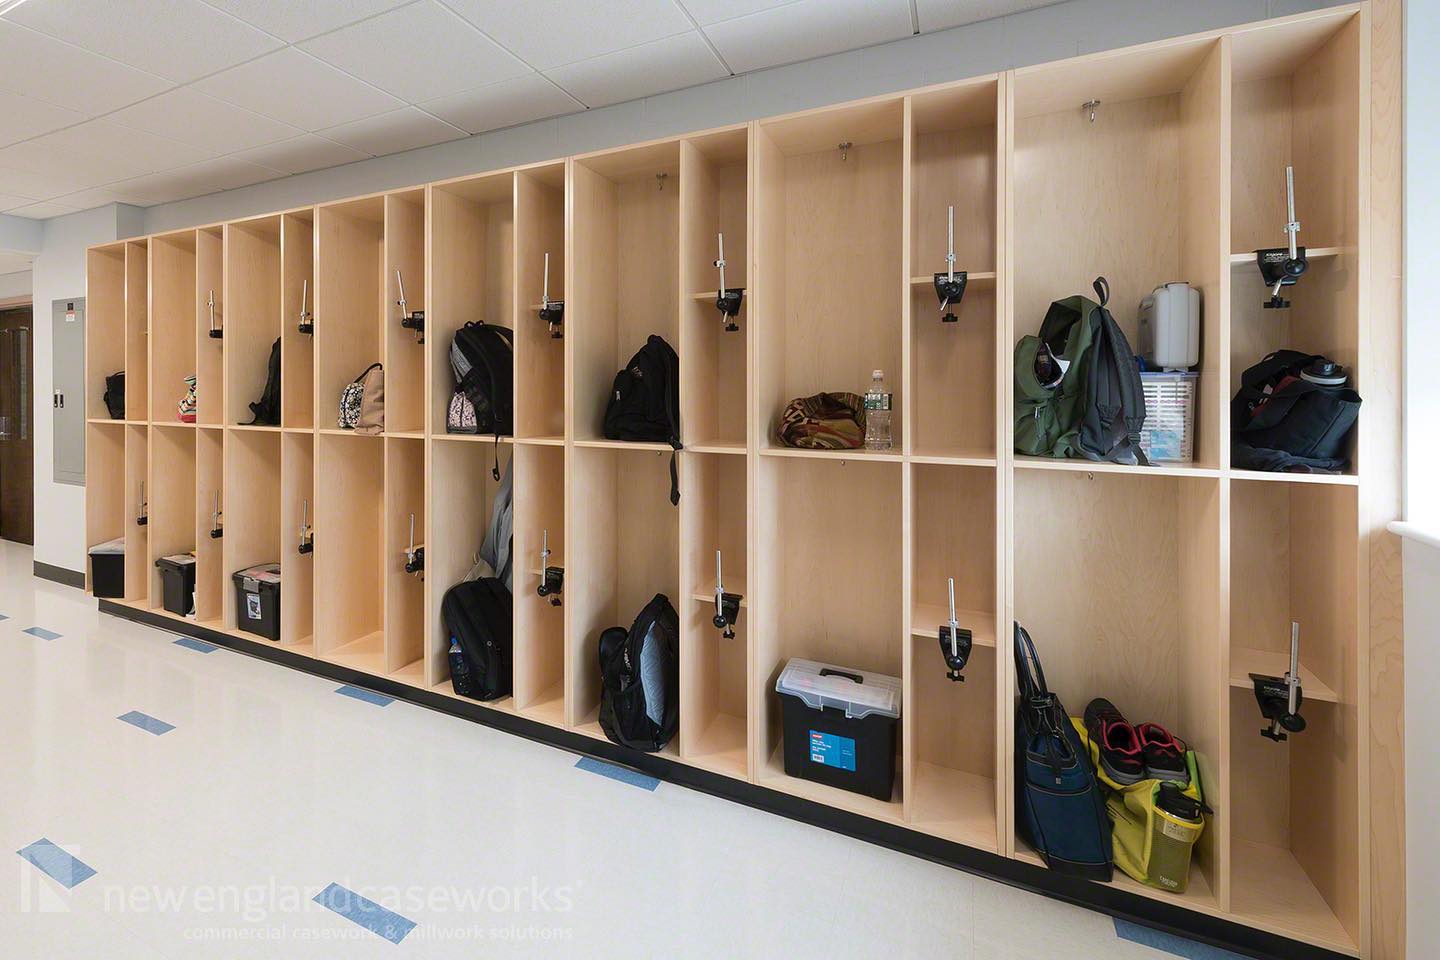 Classroom Backpack & Coat Storage
Backpack and coat storage is a common entryway structure that consists of tall open compartments with coat hooks for easy access. Contact us at https://newenglandcaseworks.com/casework-millwork/specialty-casework/classroom-backpack-storage/ to assist in designing classroom storage that best fits your needs!
#backpackstorage #coatstorage #entrywaystorage #backpackcubbies #coathooks #storagecompartments #opencompartments #openstorage #classroomstorage #commercialstorage #woodstorage #phenolicstorage #laminatestorage #woodcabinets #phenoliccabinets #woodcabinets #instagram